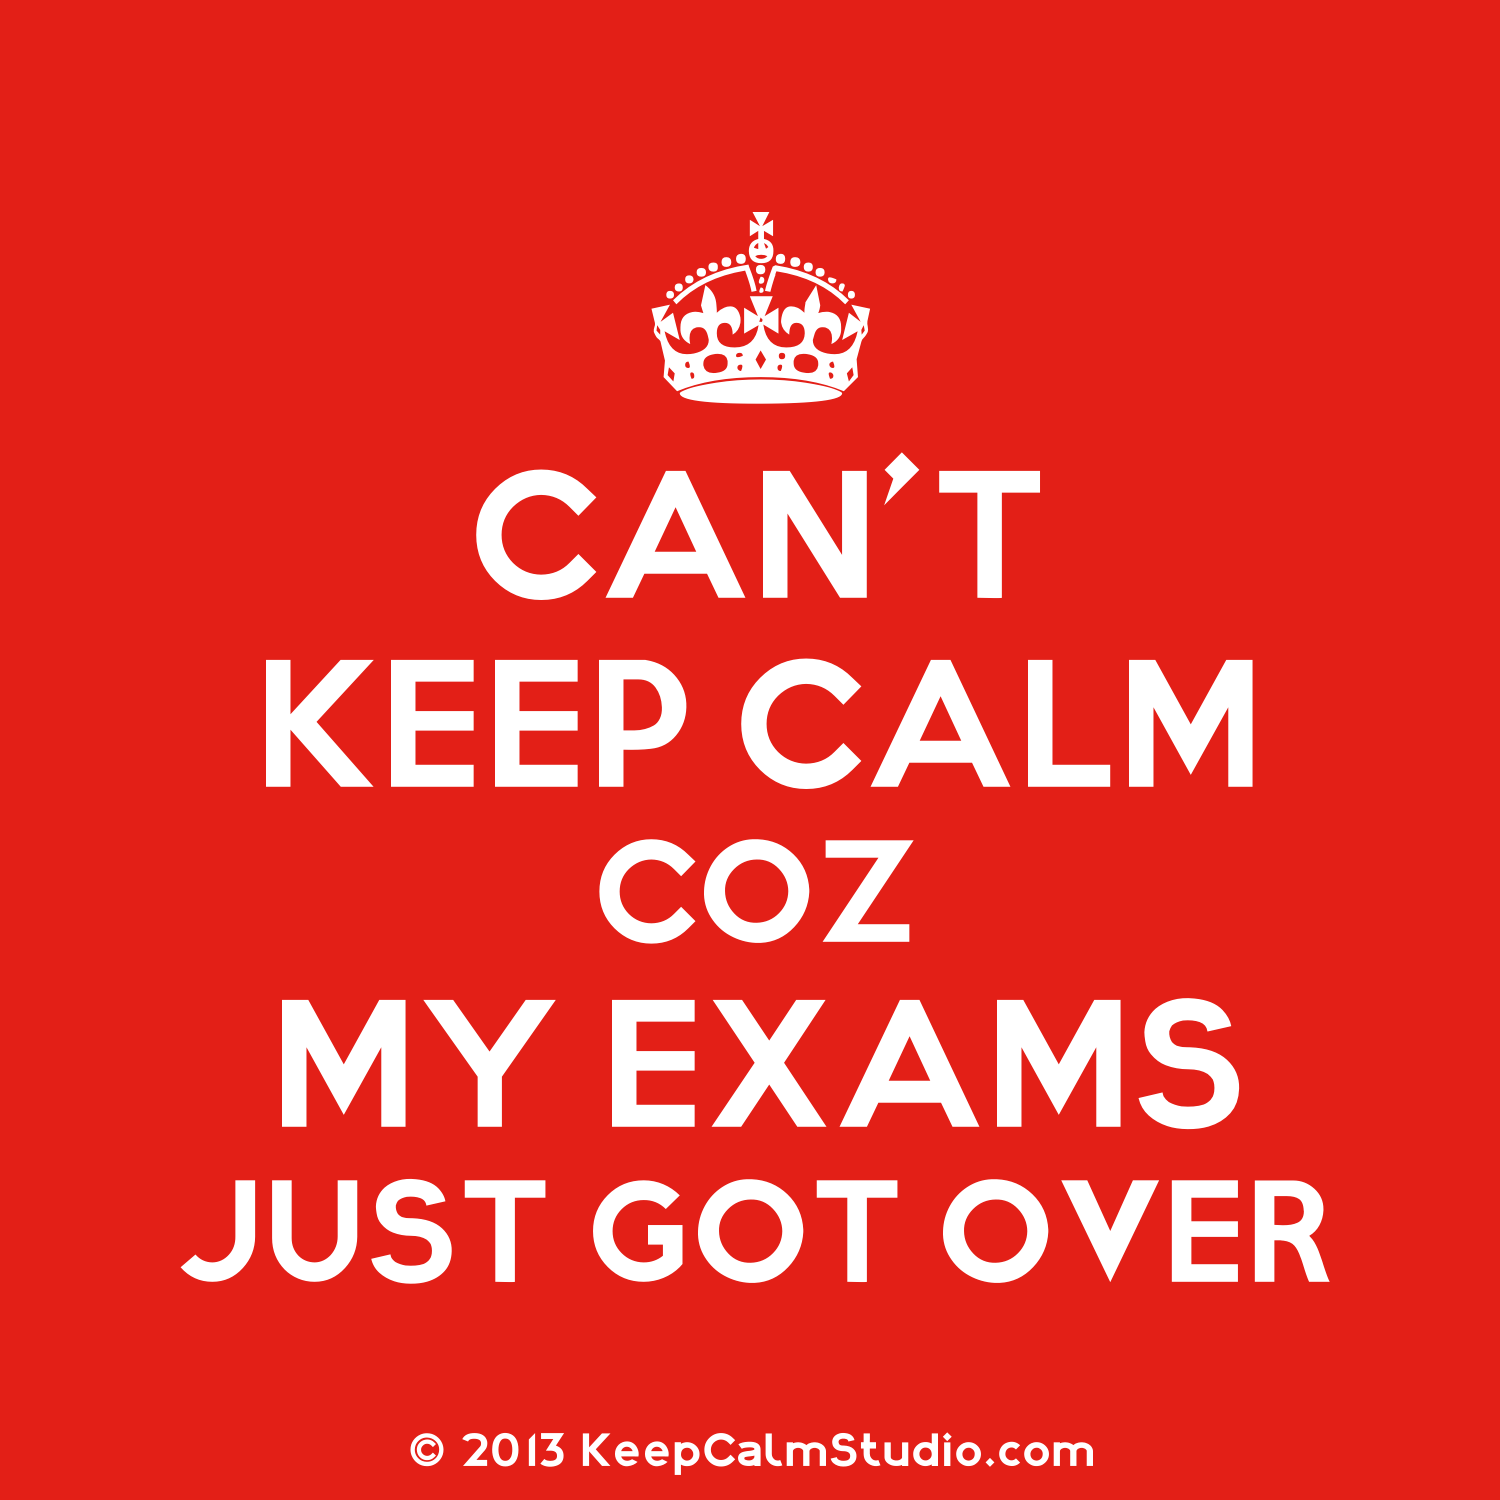 Quotes about Exam over (22 quotes)